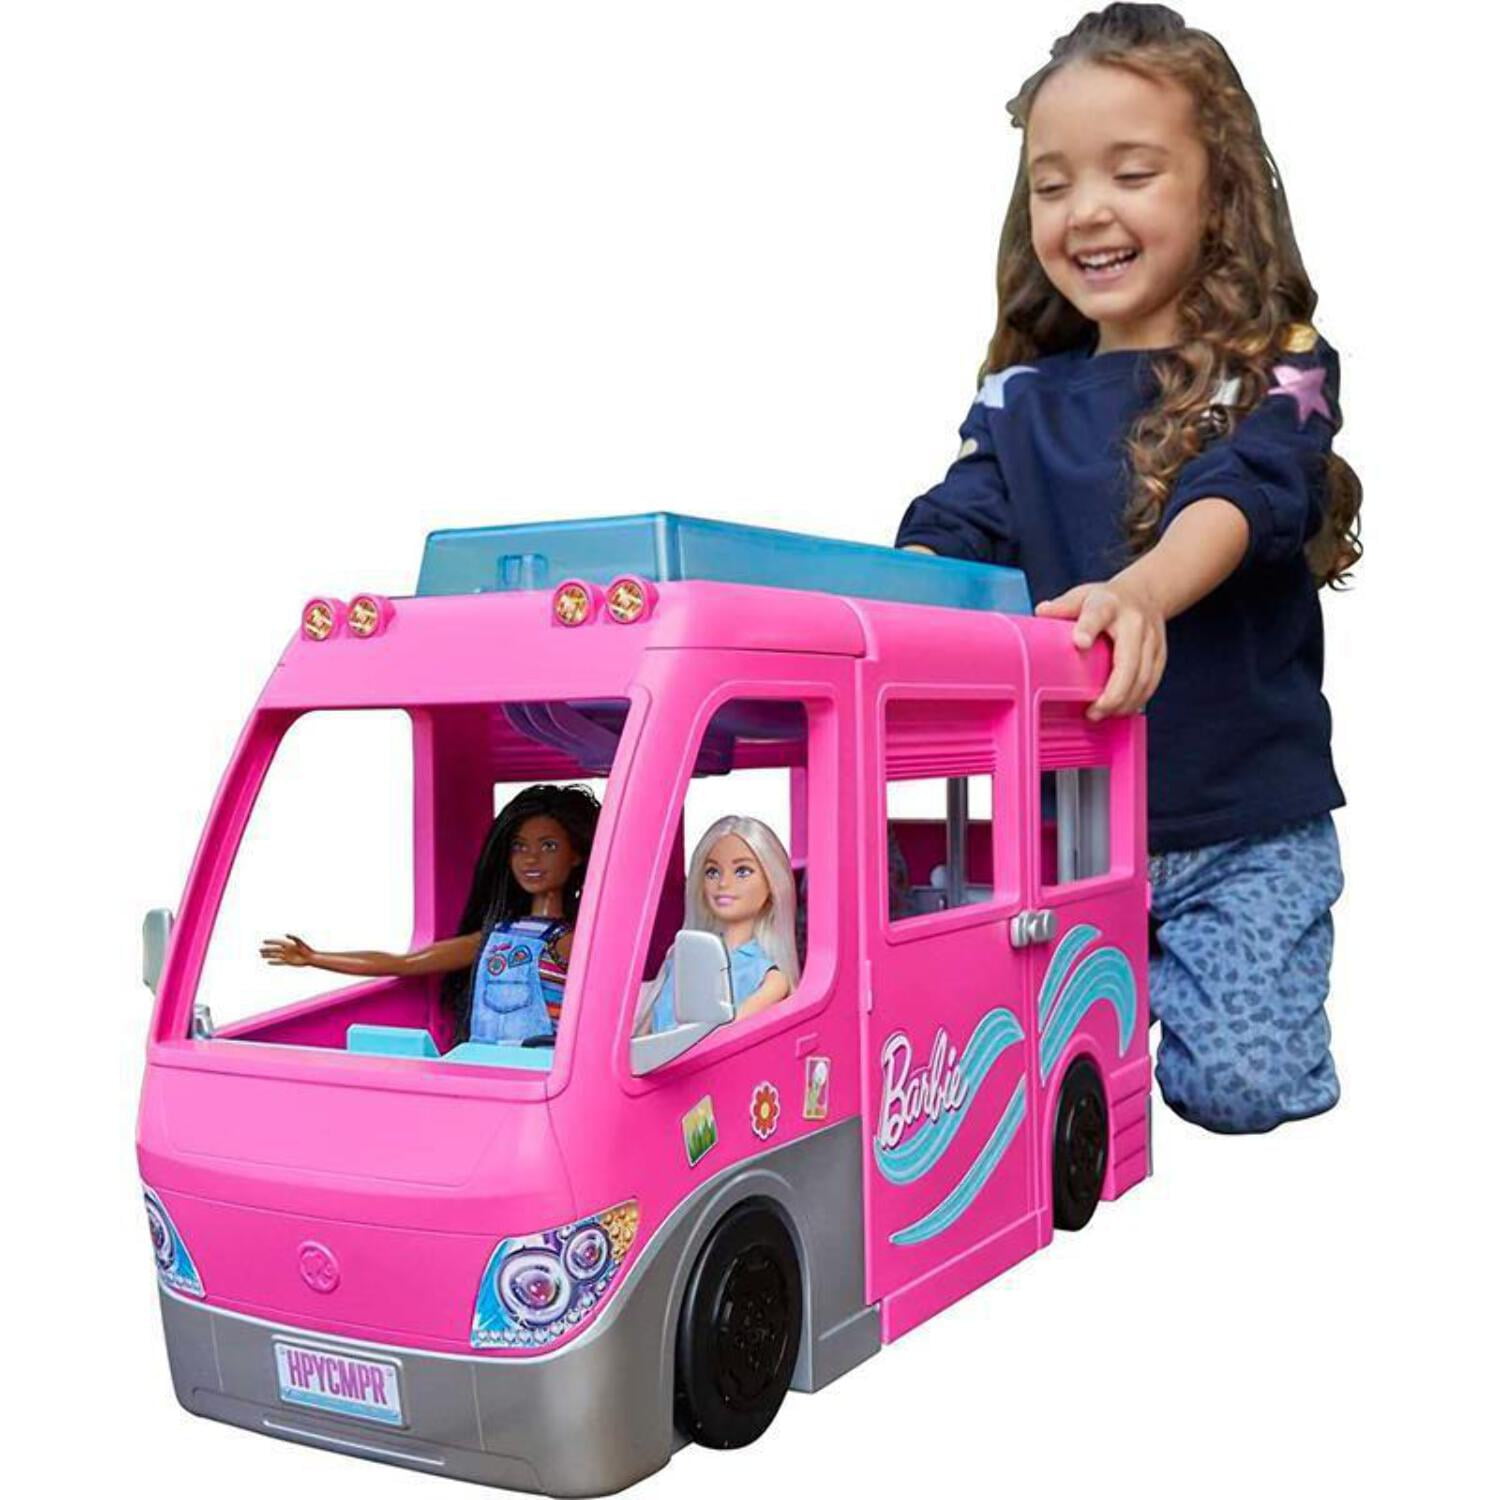 Barbie Carnival Playset : : Toys & Games